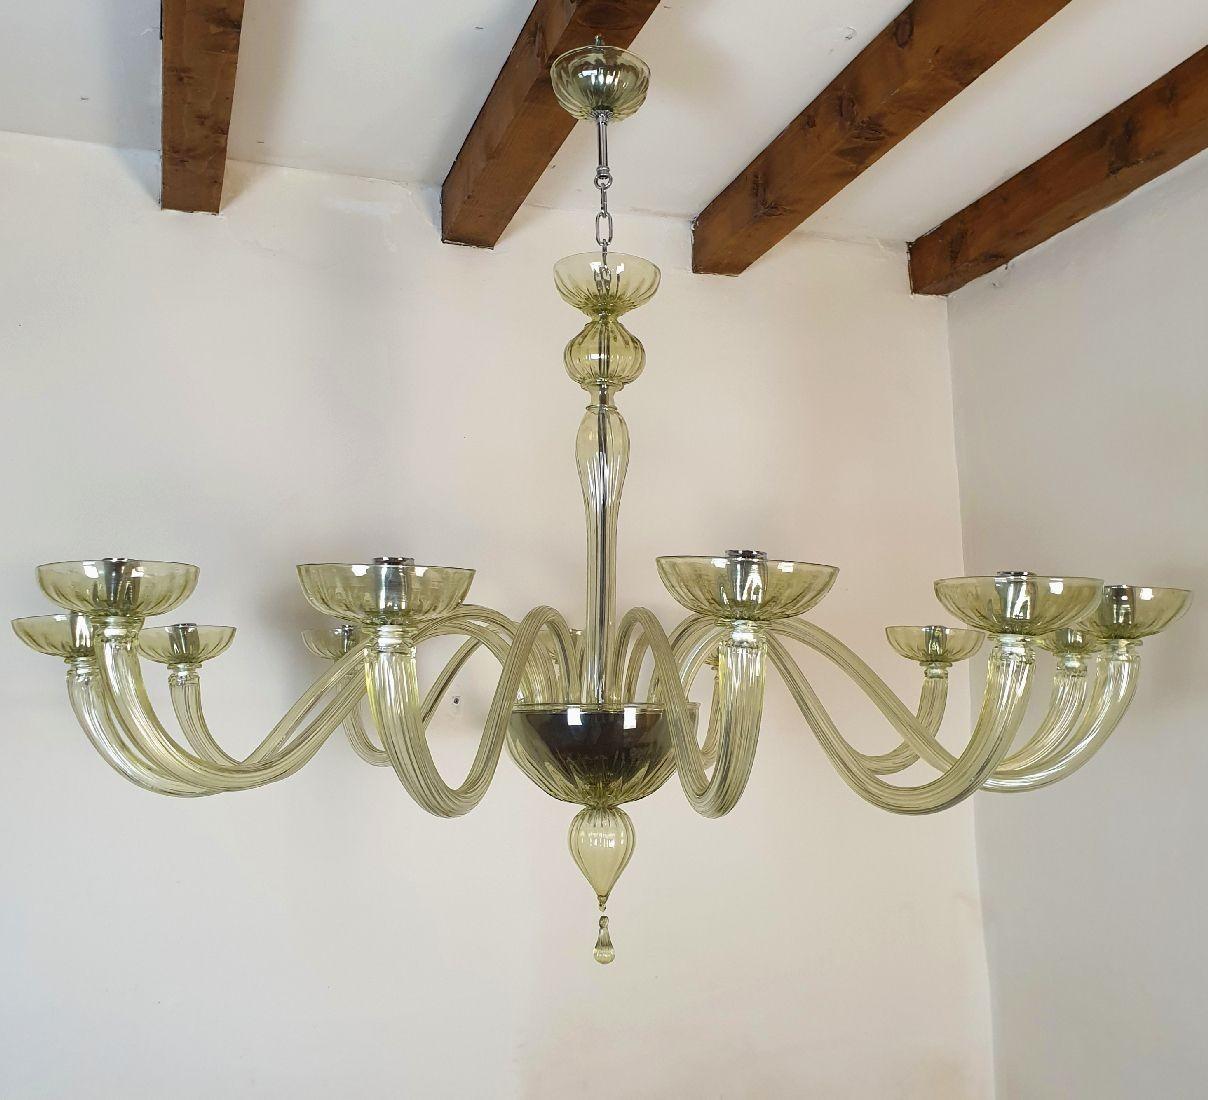 Extra large Murano glass chandelier, attributed to Venini, Italy 1970s.
The Mid Century Modern chandelier is handmade, in a light transparent green Murano glass.
It has chrome mounts.
The chandelier has 12 lights / arms.
It has been rewired for